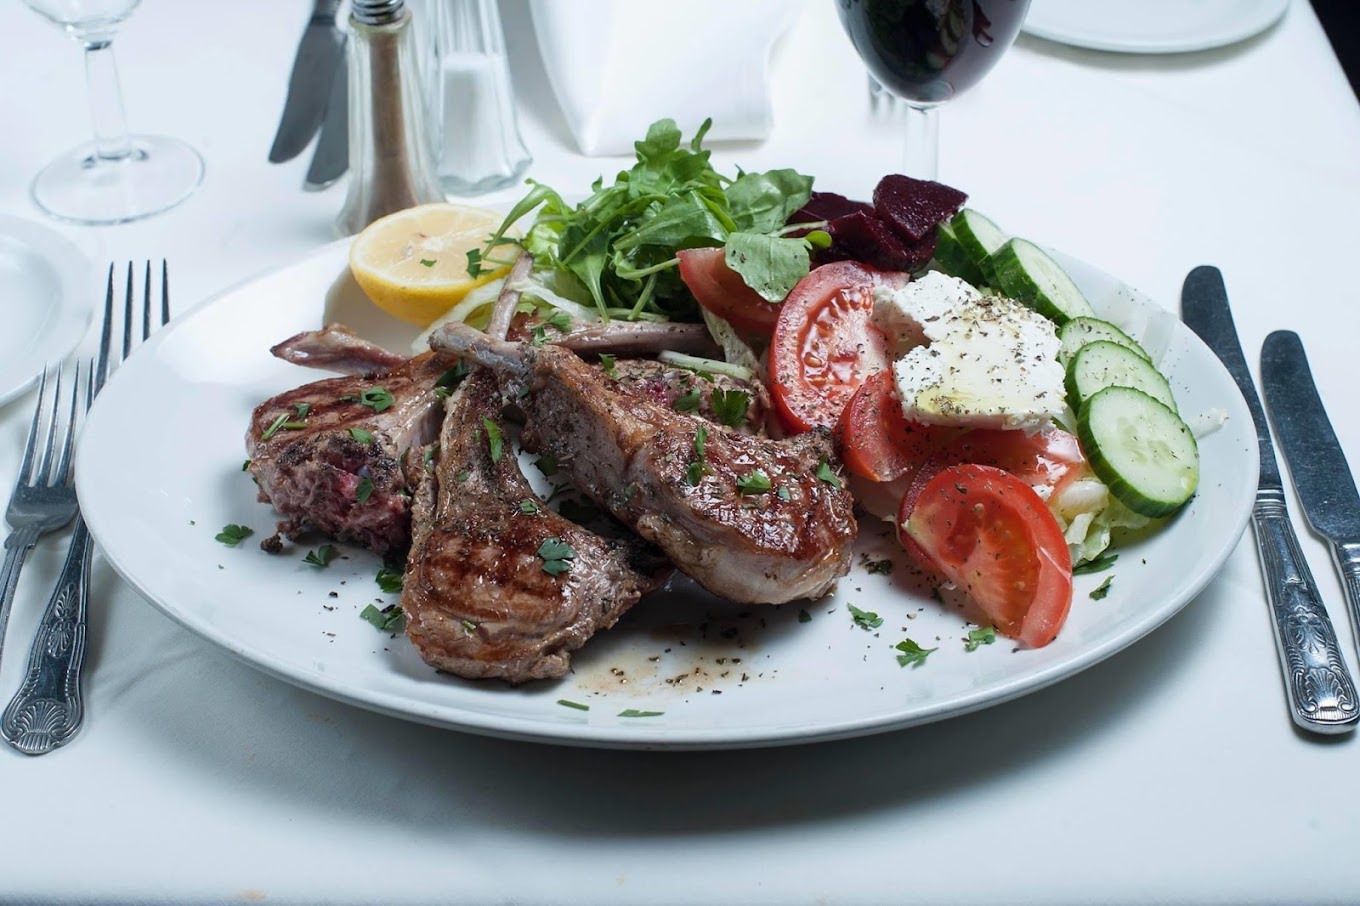 Indulge in the vibrant and delicious cuisine of Greece at these top Greek restaurants in London. From traditional souvlaki and moussaka to modern twists on classic dishes, discover the best of Greek cuisine in the city. #greekfood #londonfoodguide #london | Places To Eat In London #foodie | Things To Do In London | Best Greek Restaurants In London | European Cuisine | London Gastronomy | Best Restaurants In London | London Restaurant Aesthetic | Greek Aesthetic #souvlaki #moussaka #tzatziki